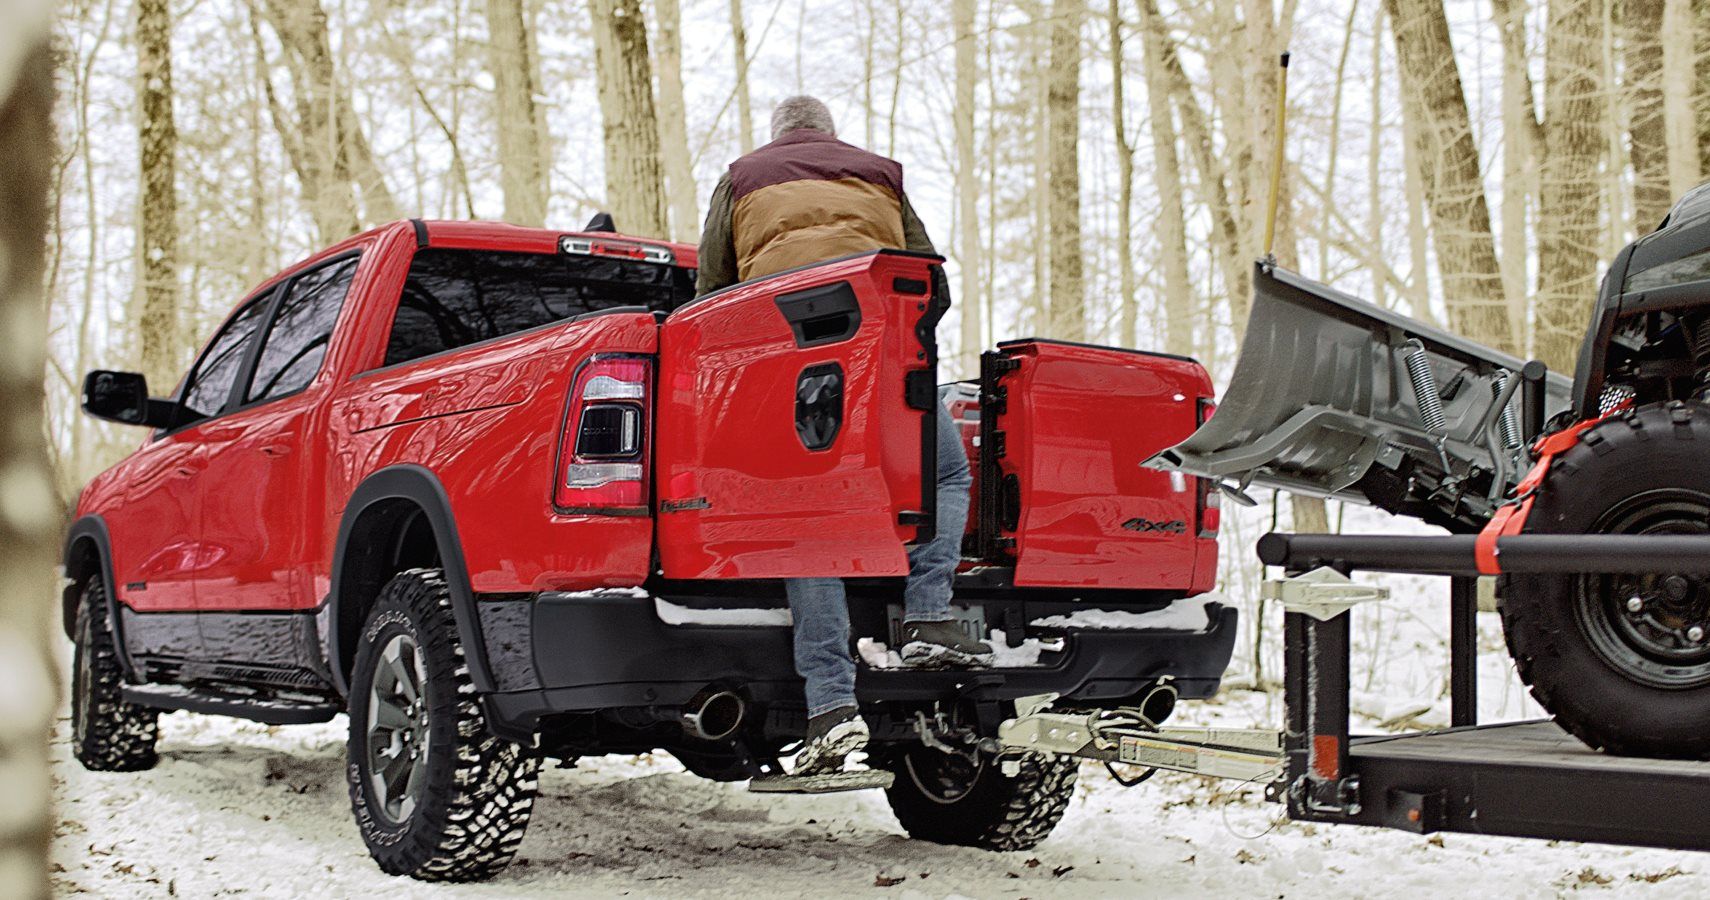 2019 Ram 1500 Multifunction Tailgate with Mopar Bed Step